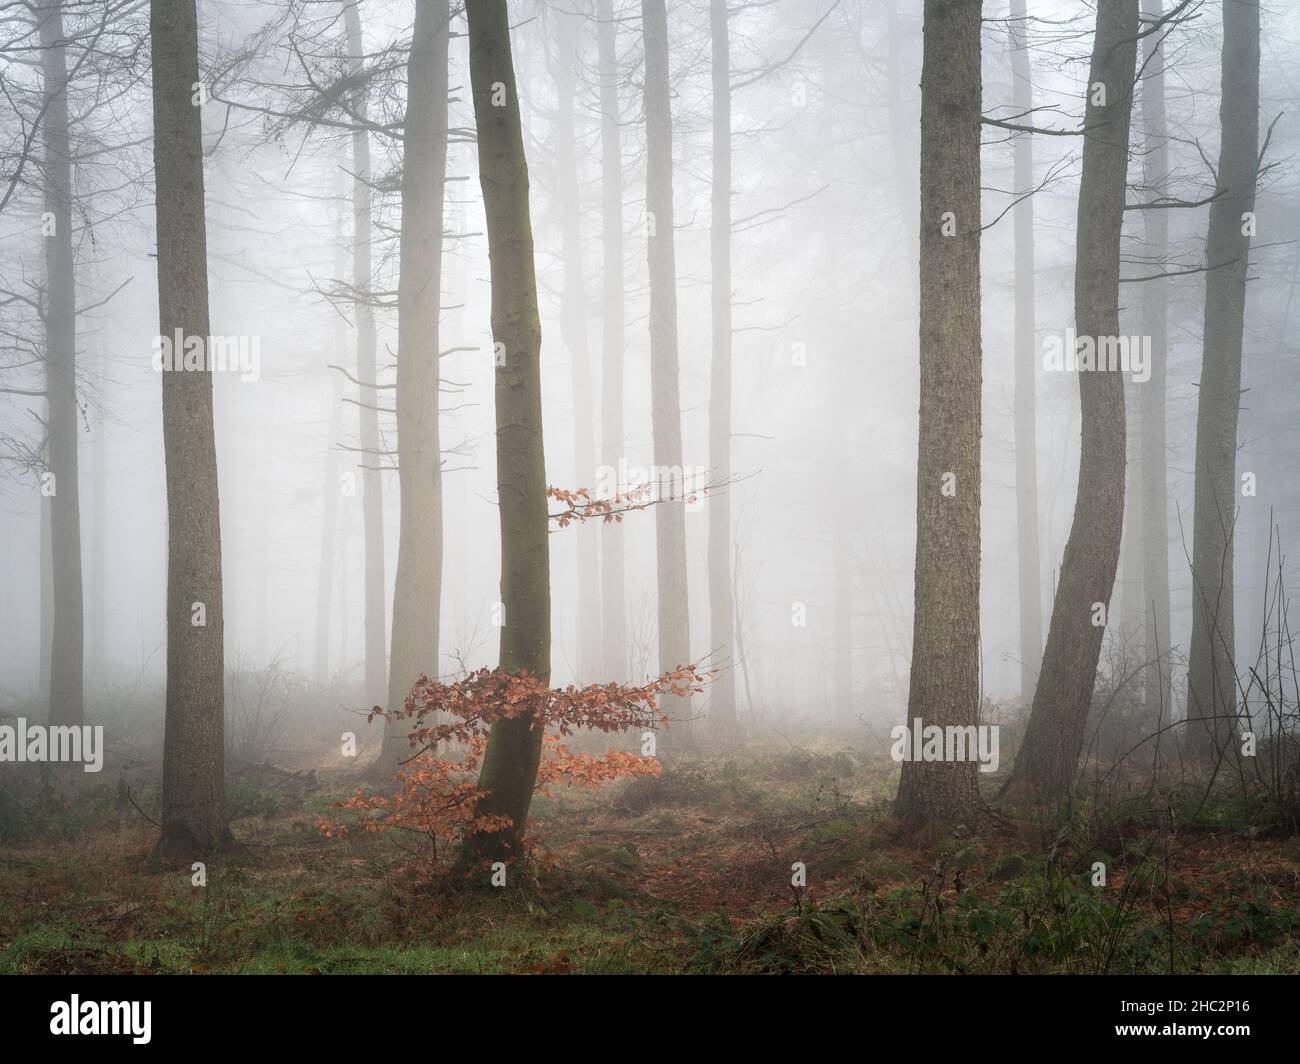 Thick fog envelopes Chevin Forest Park on a chilly December morning with the outlines of winter trees fading into the mist. Stock Photo